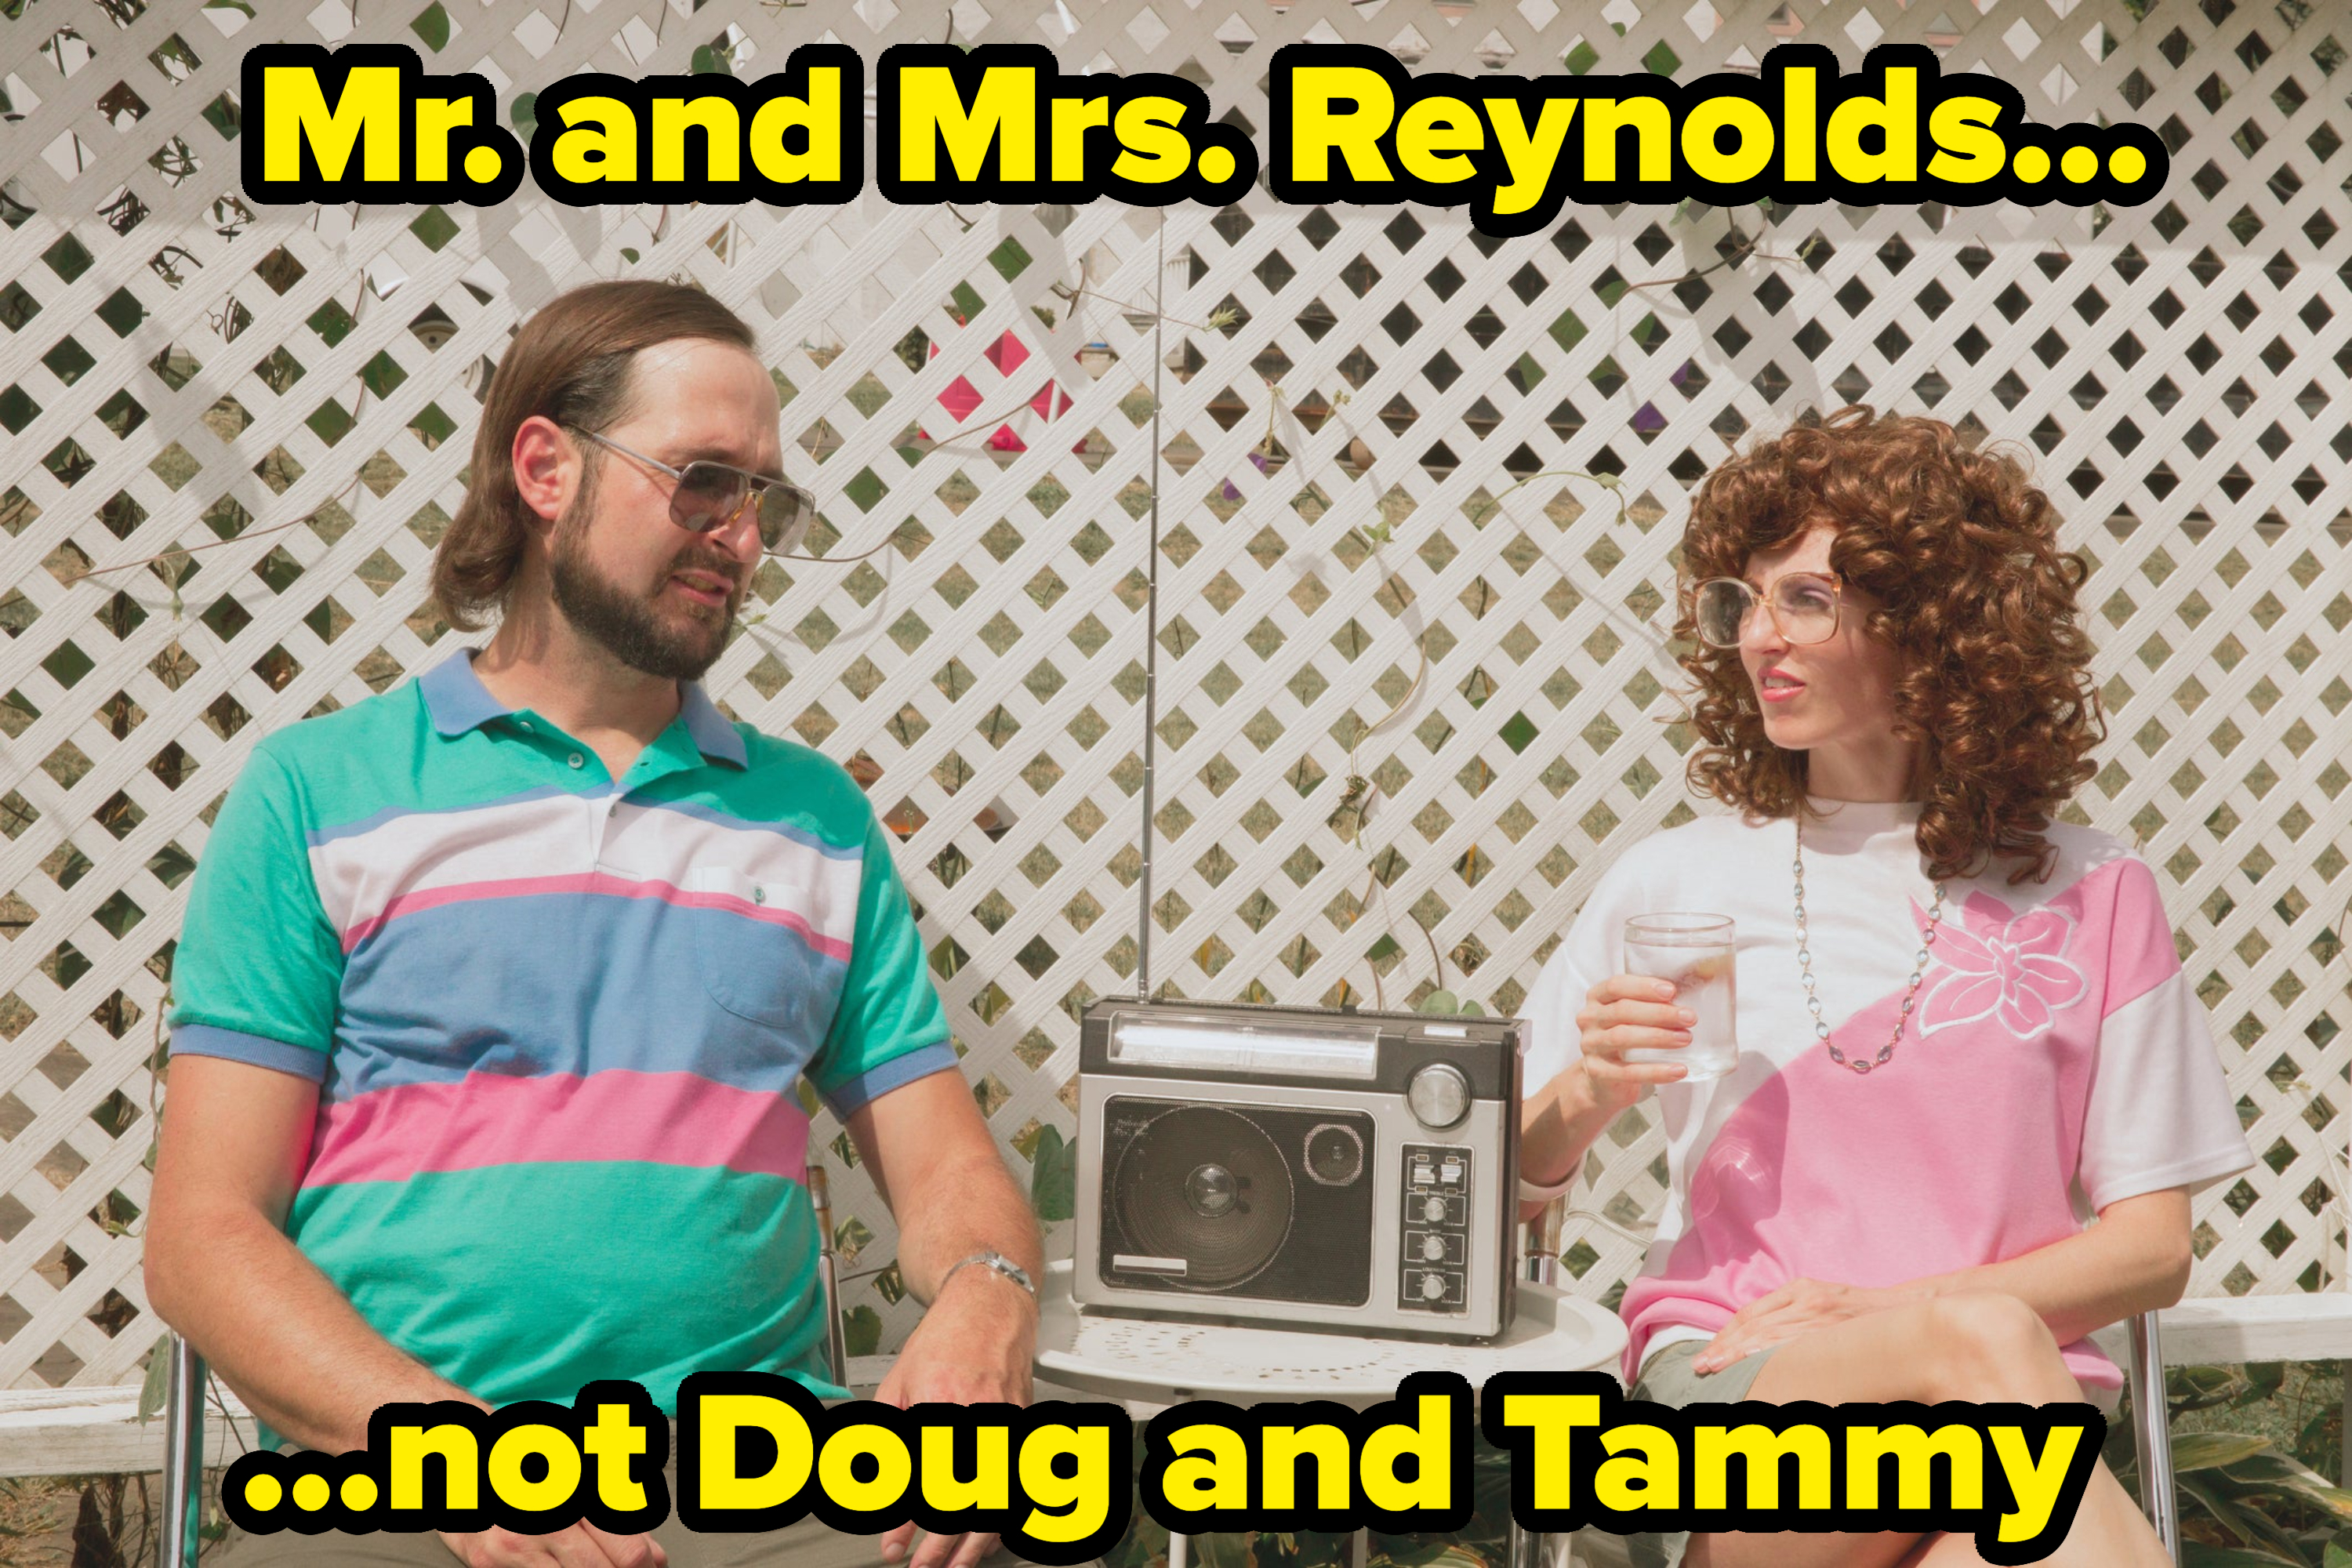 &quot;Mr. and Mrs. Reynolds...not Doug and Tammy&quot;